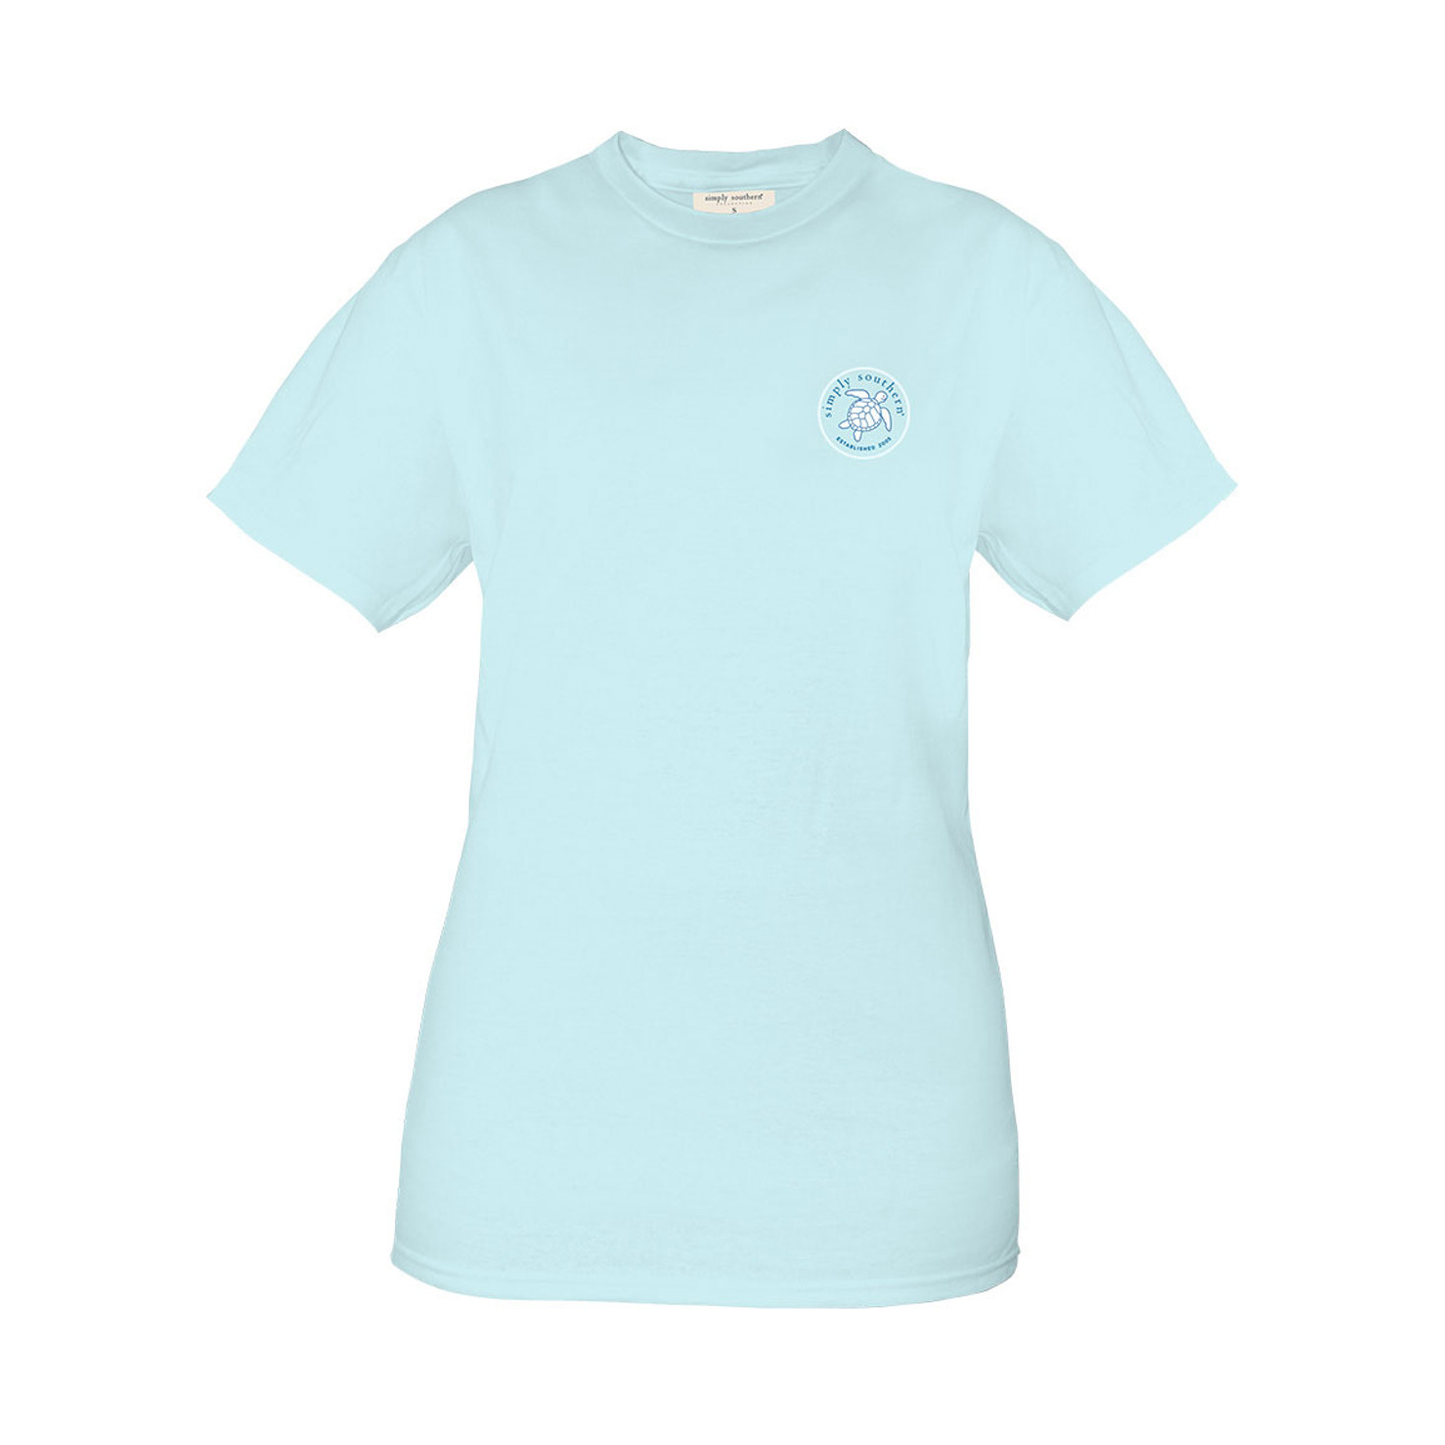 Simply Southern Ladies Bus Ice Blue Short Sleeve T-Shirt SS-BUS-ICE